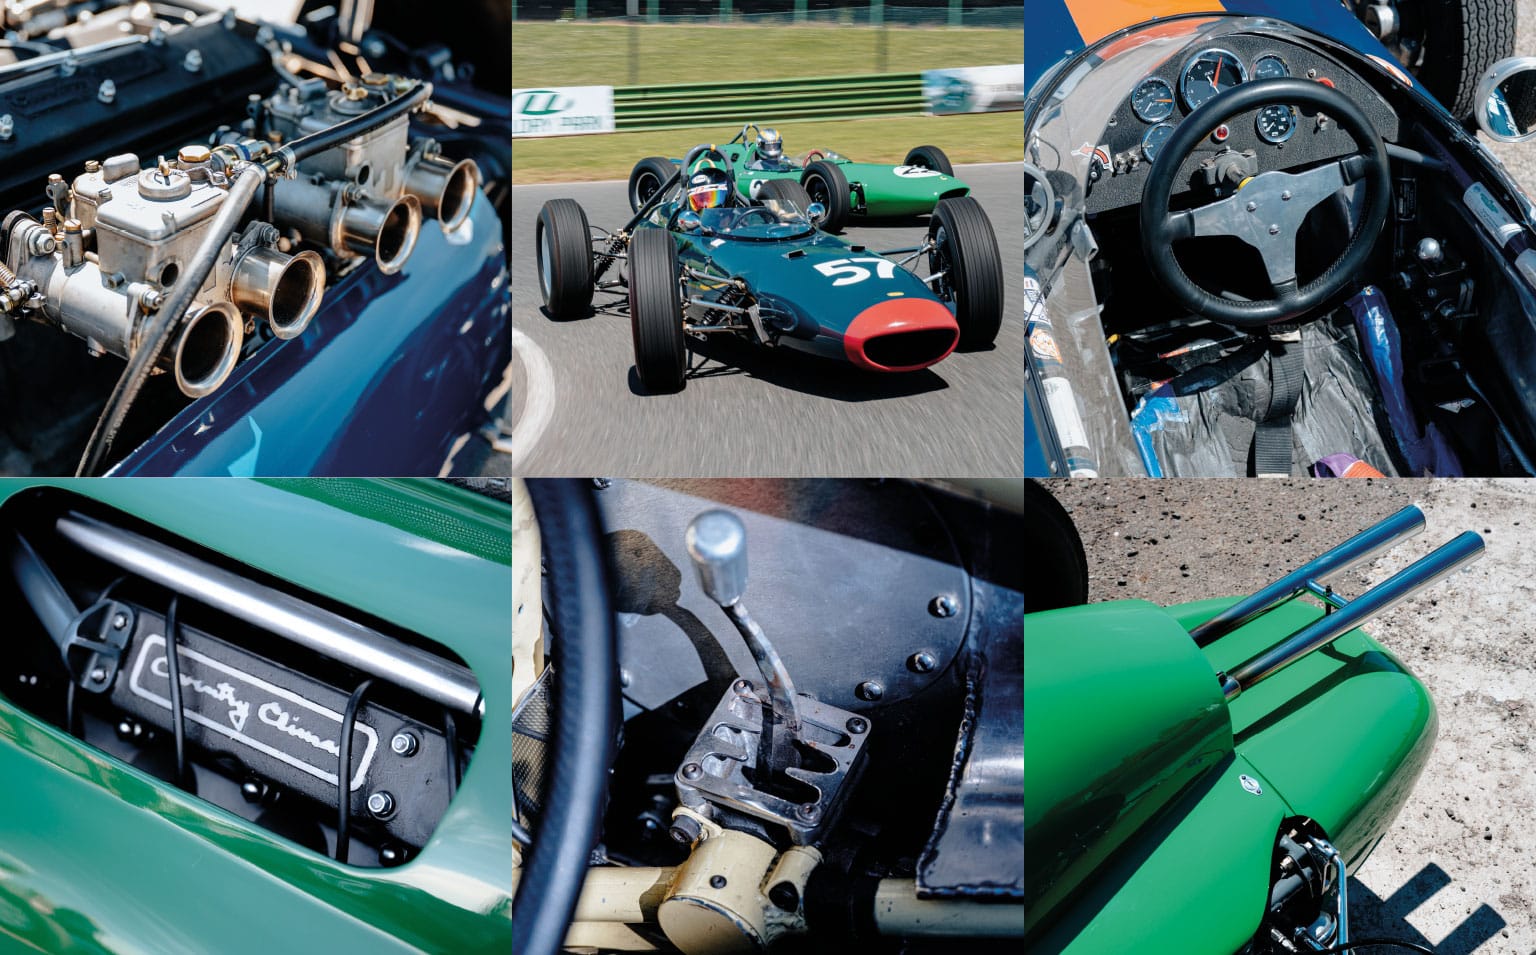 A range of imagery from around the classic F1 cars